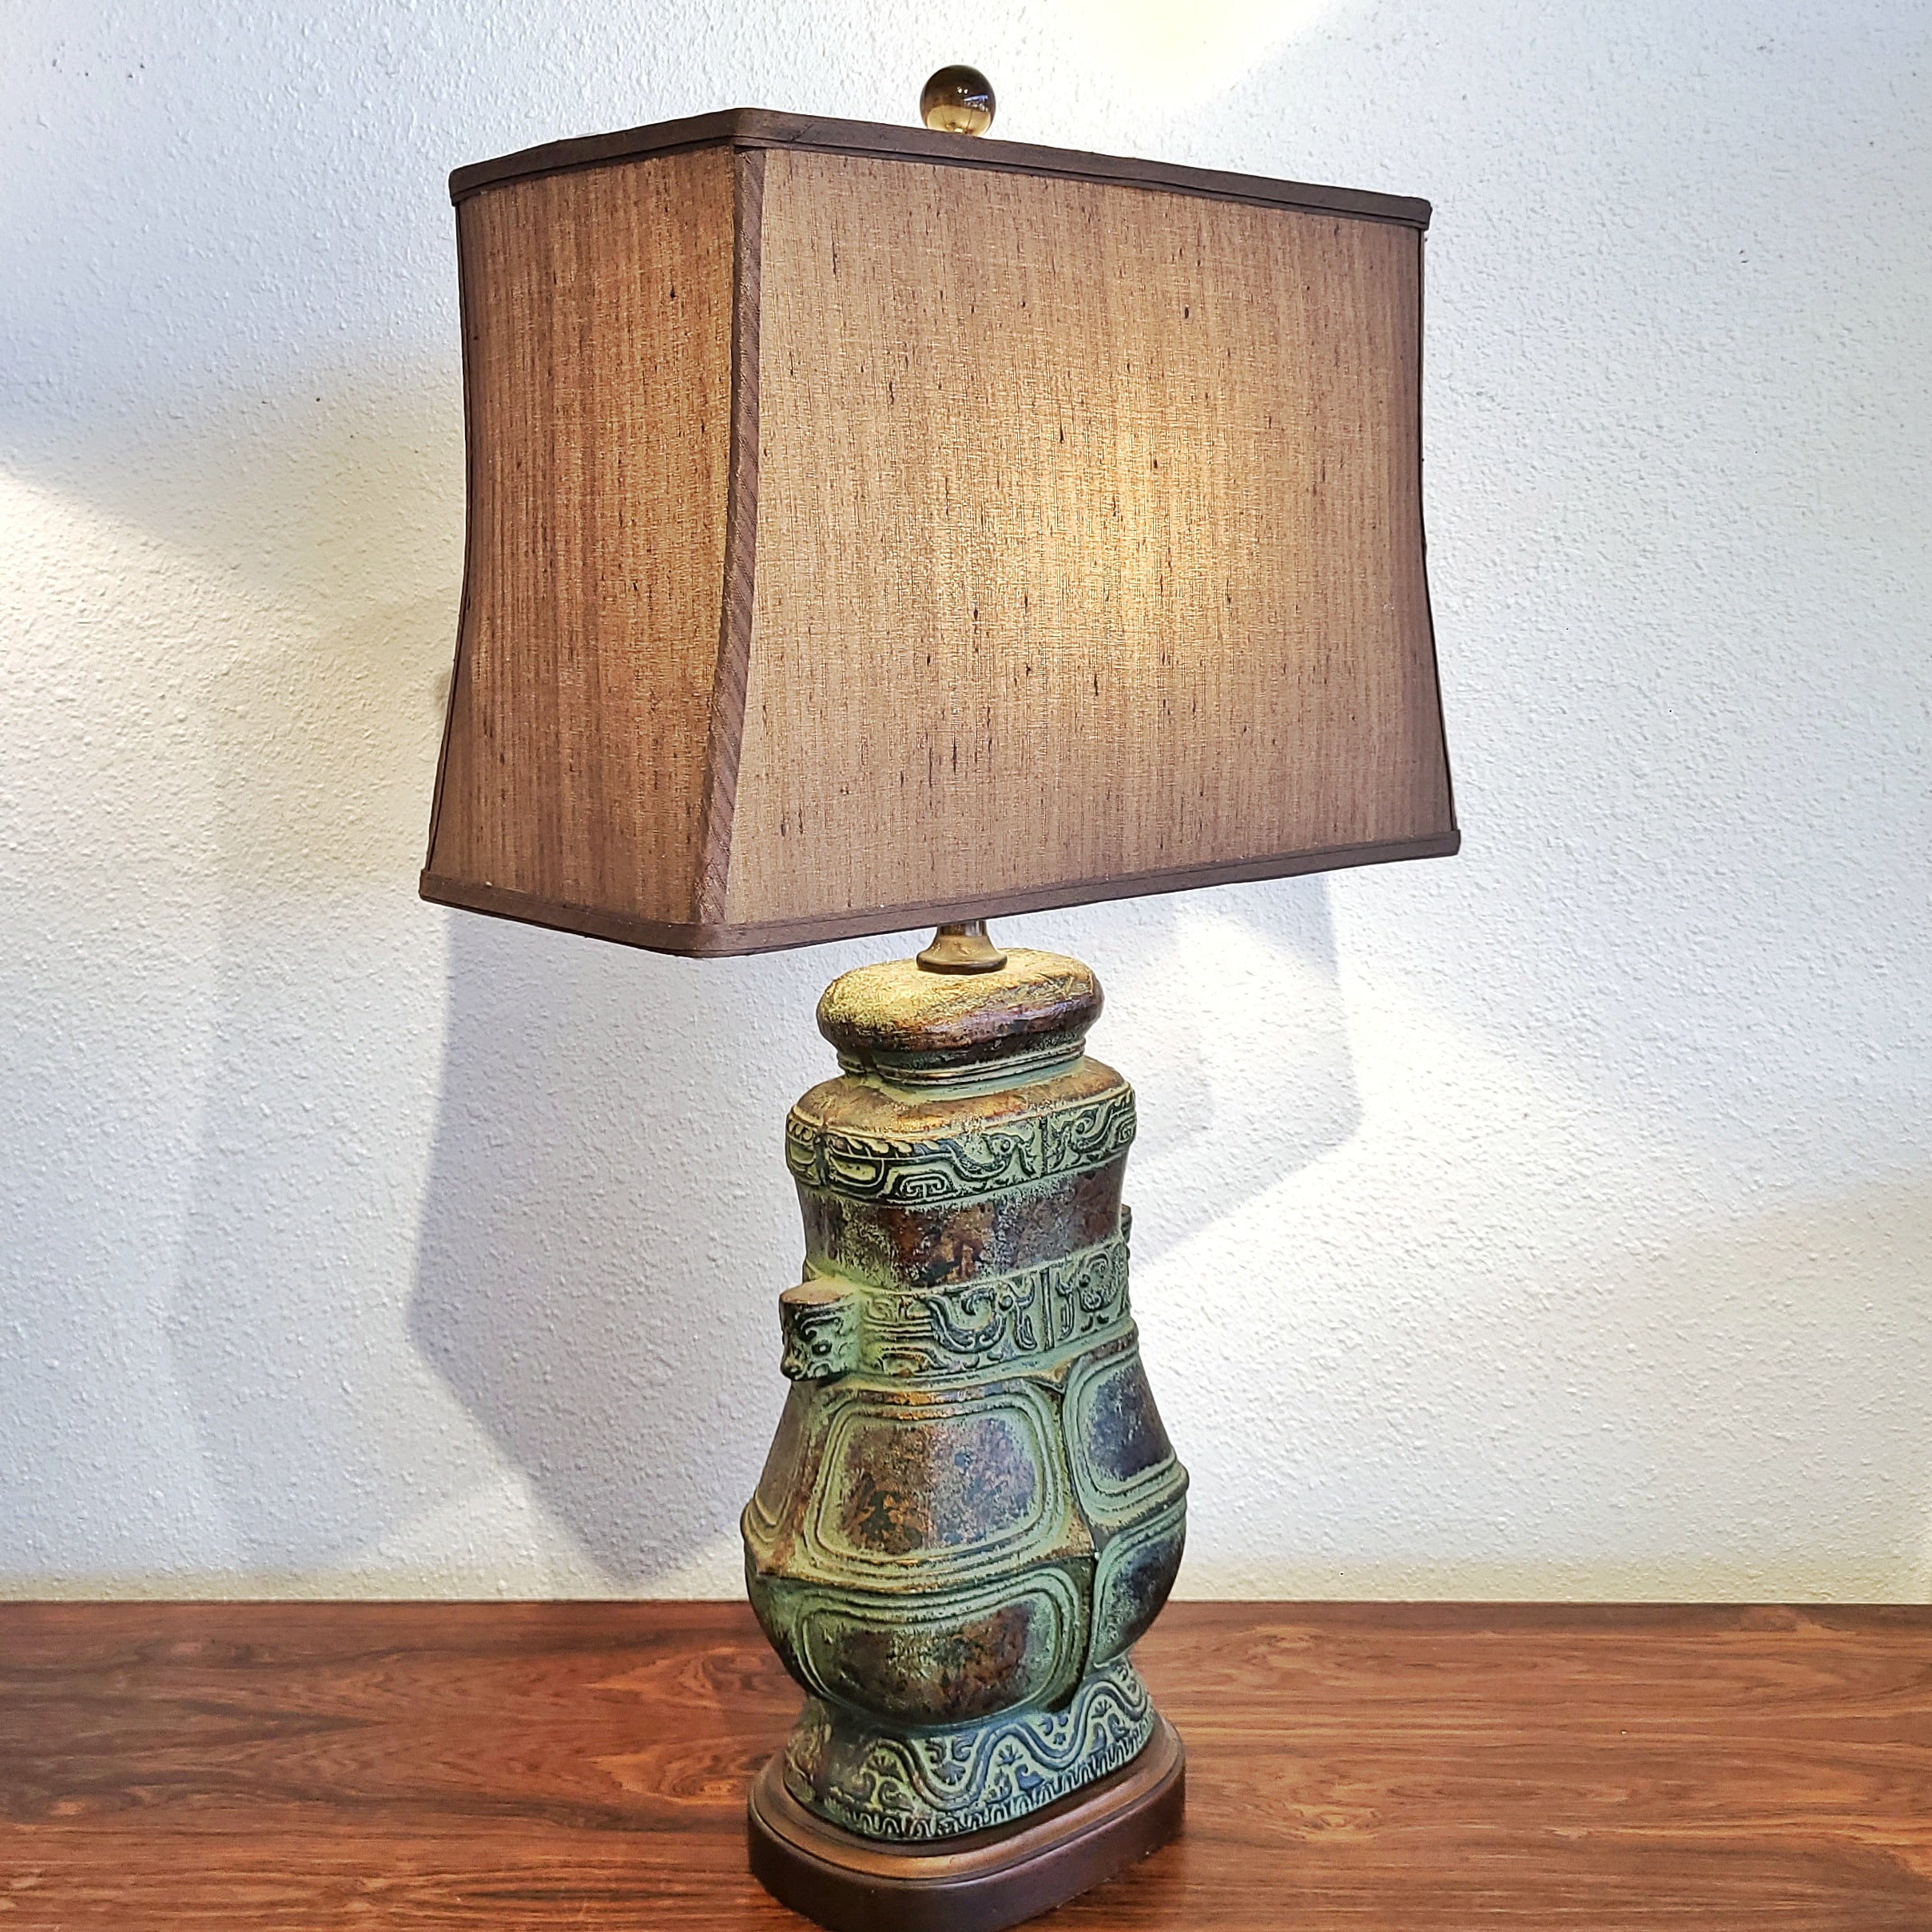 BRONZE FREDERICK COOPER TABLE LAMP IN THE STYLE OF JAMES MONT